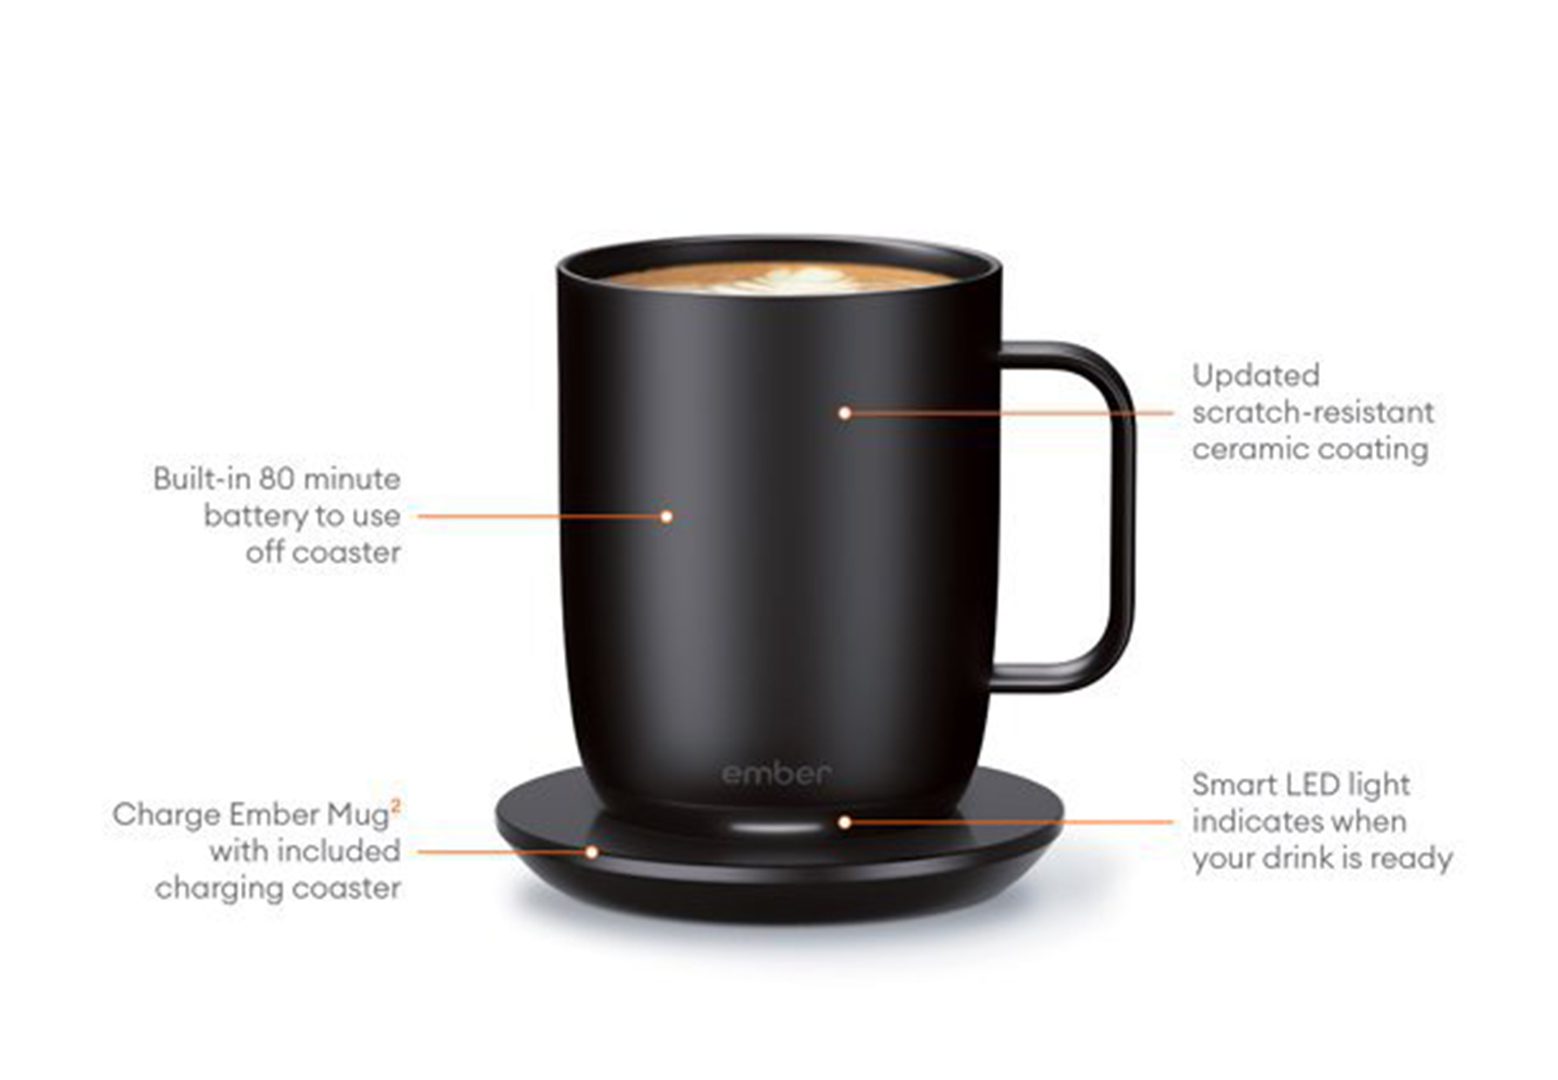 Ember's innovative mug with warming capabilities for a holiday gif